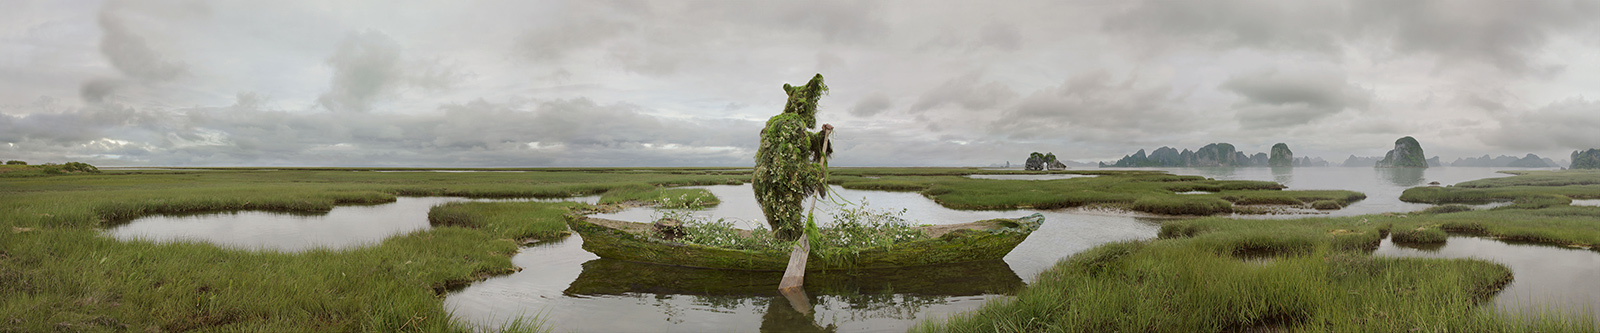 moss covered man in boat in wetland